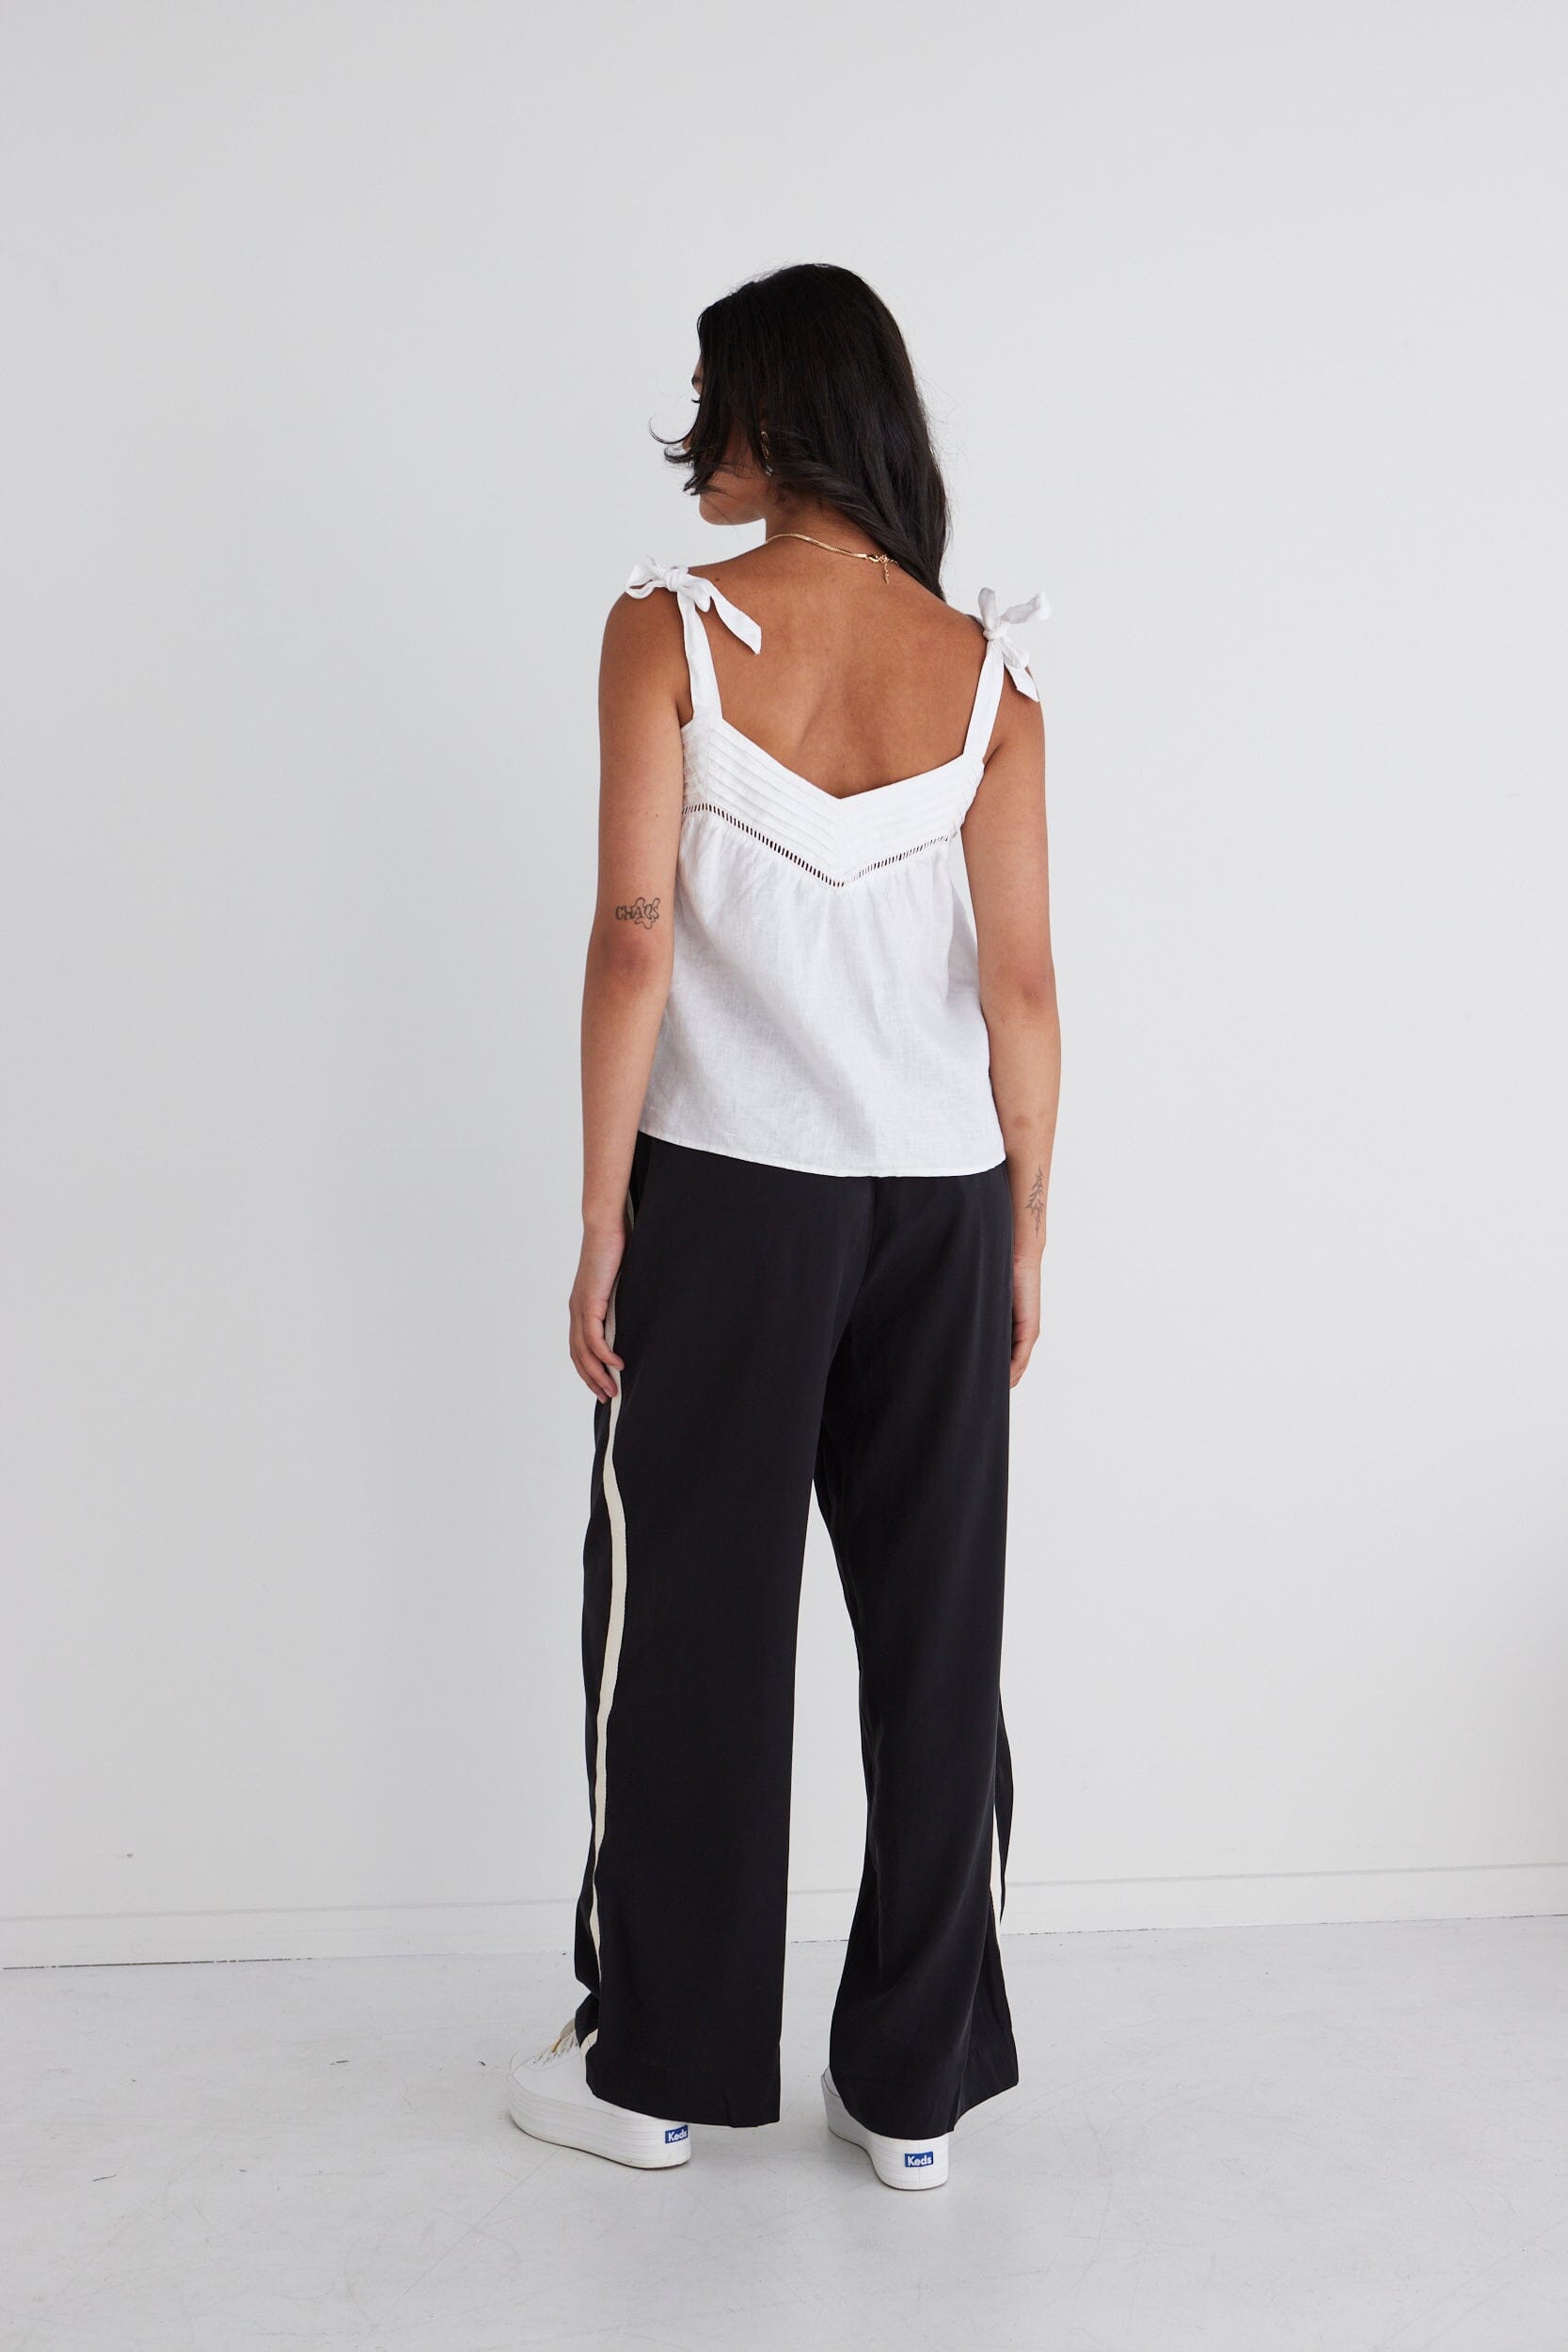 Stories Be Told | Townie Pant - Black Womens Stories Be Told